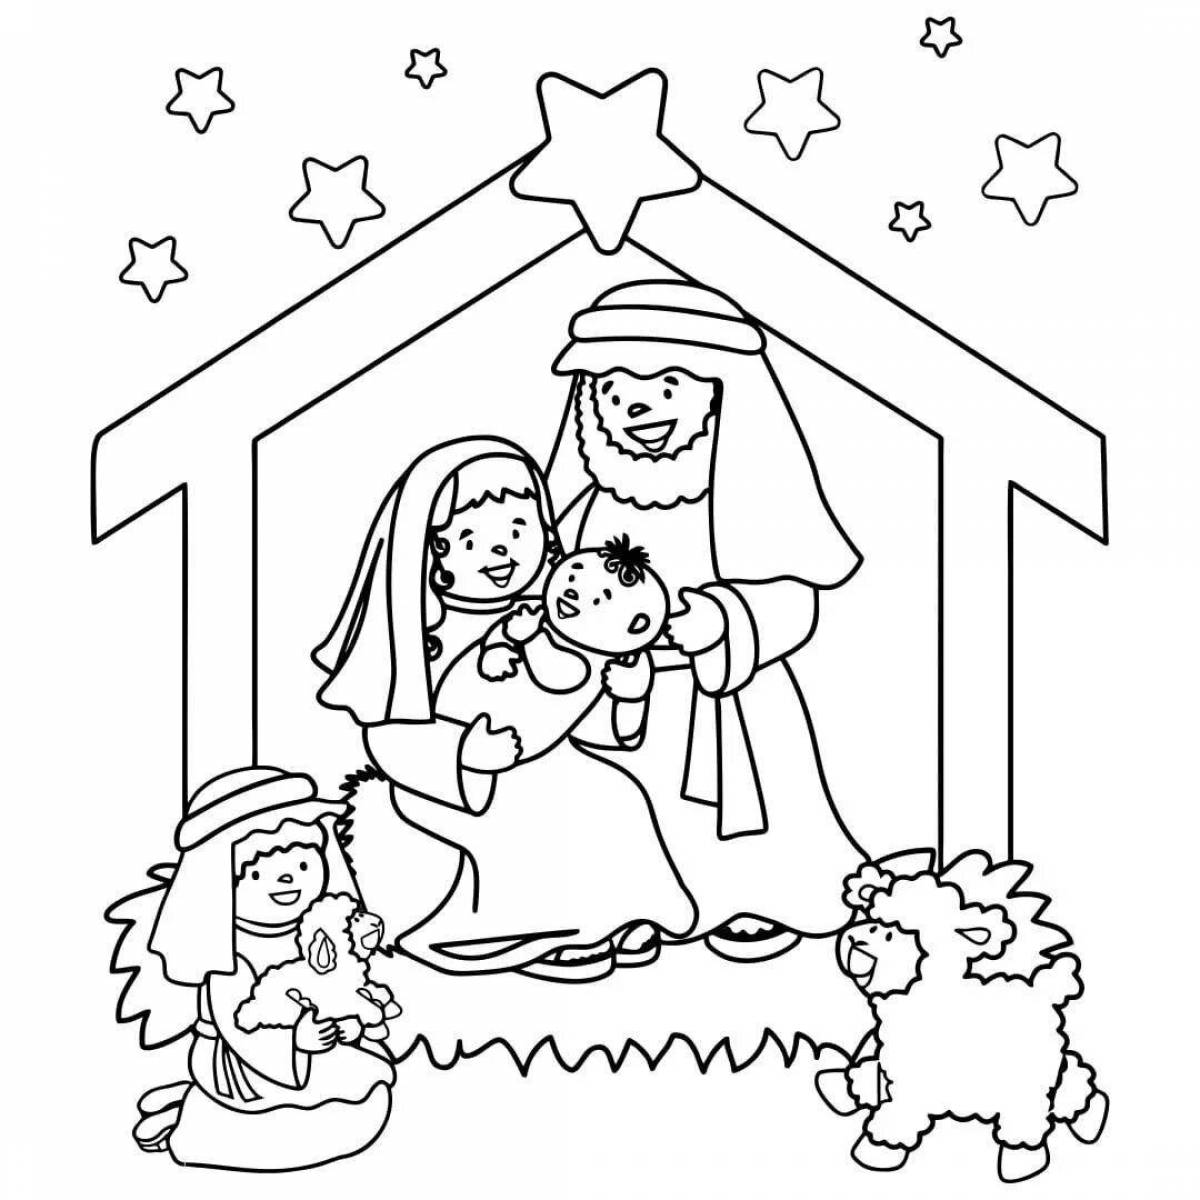 Exquisite nativity scene coloring book for kids